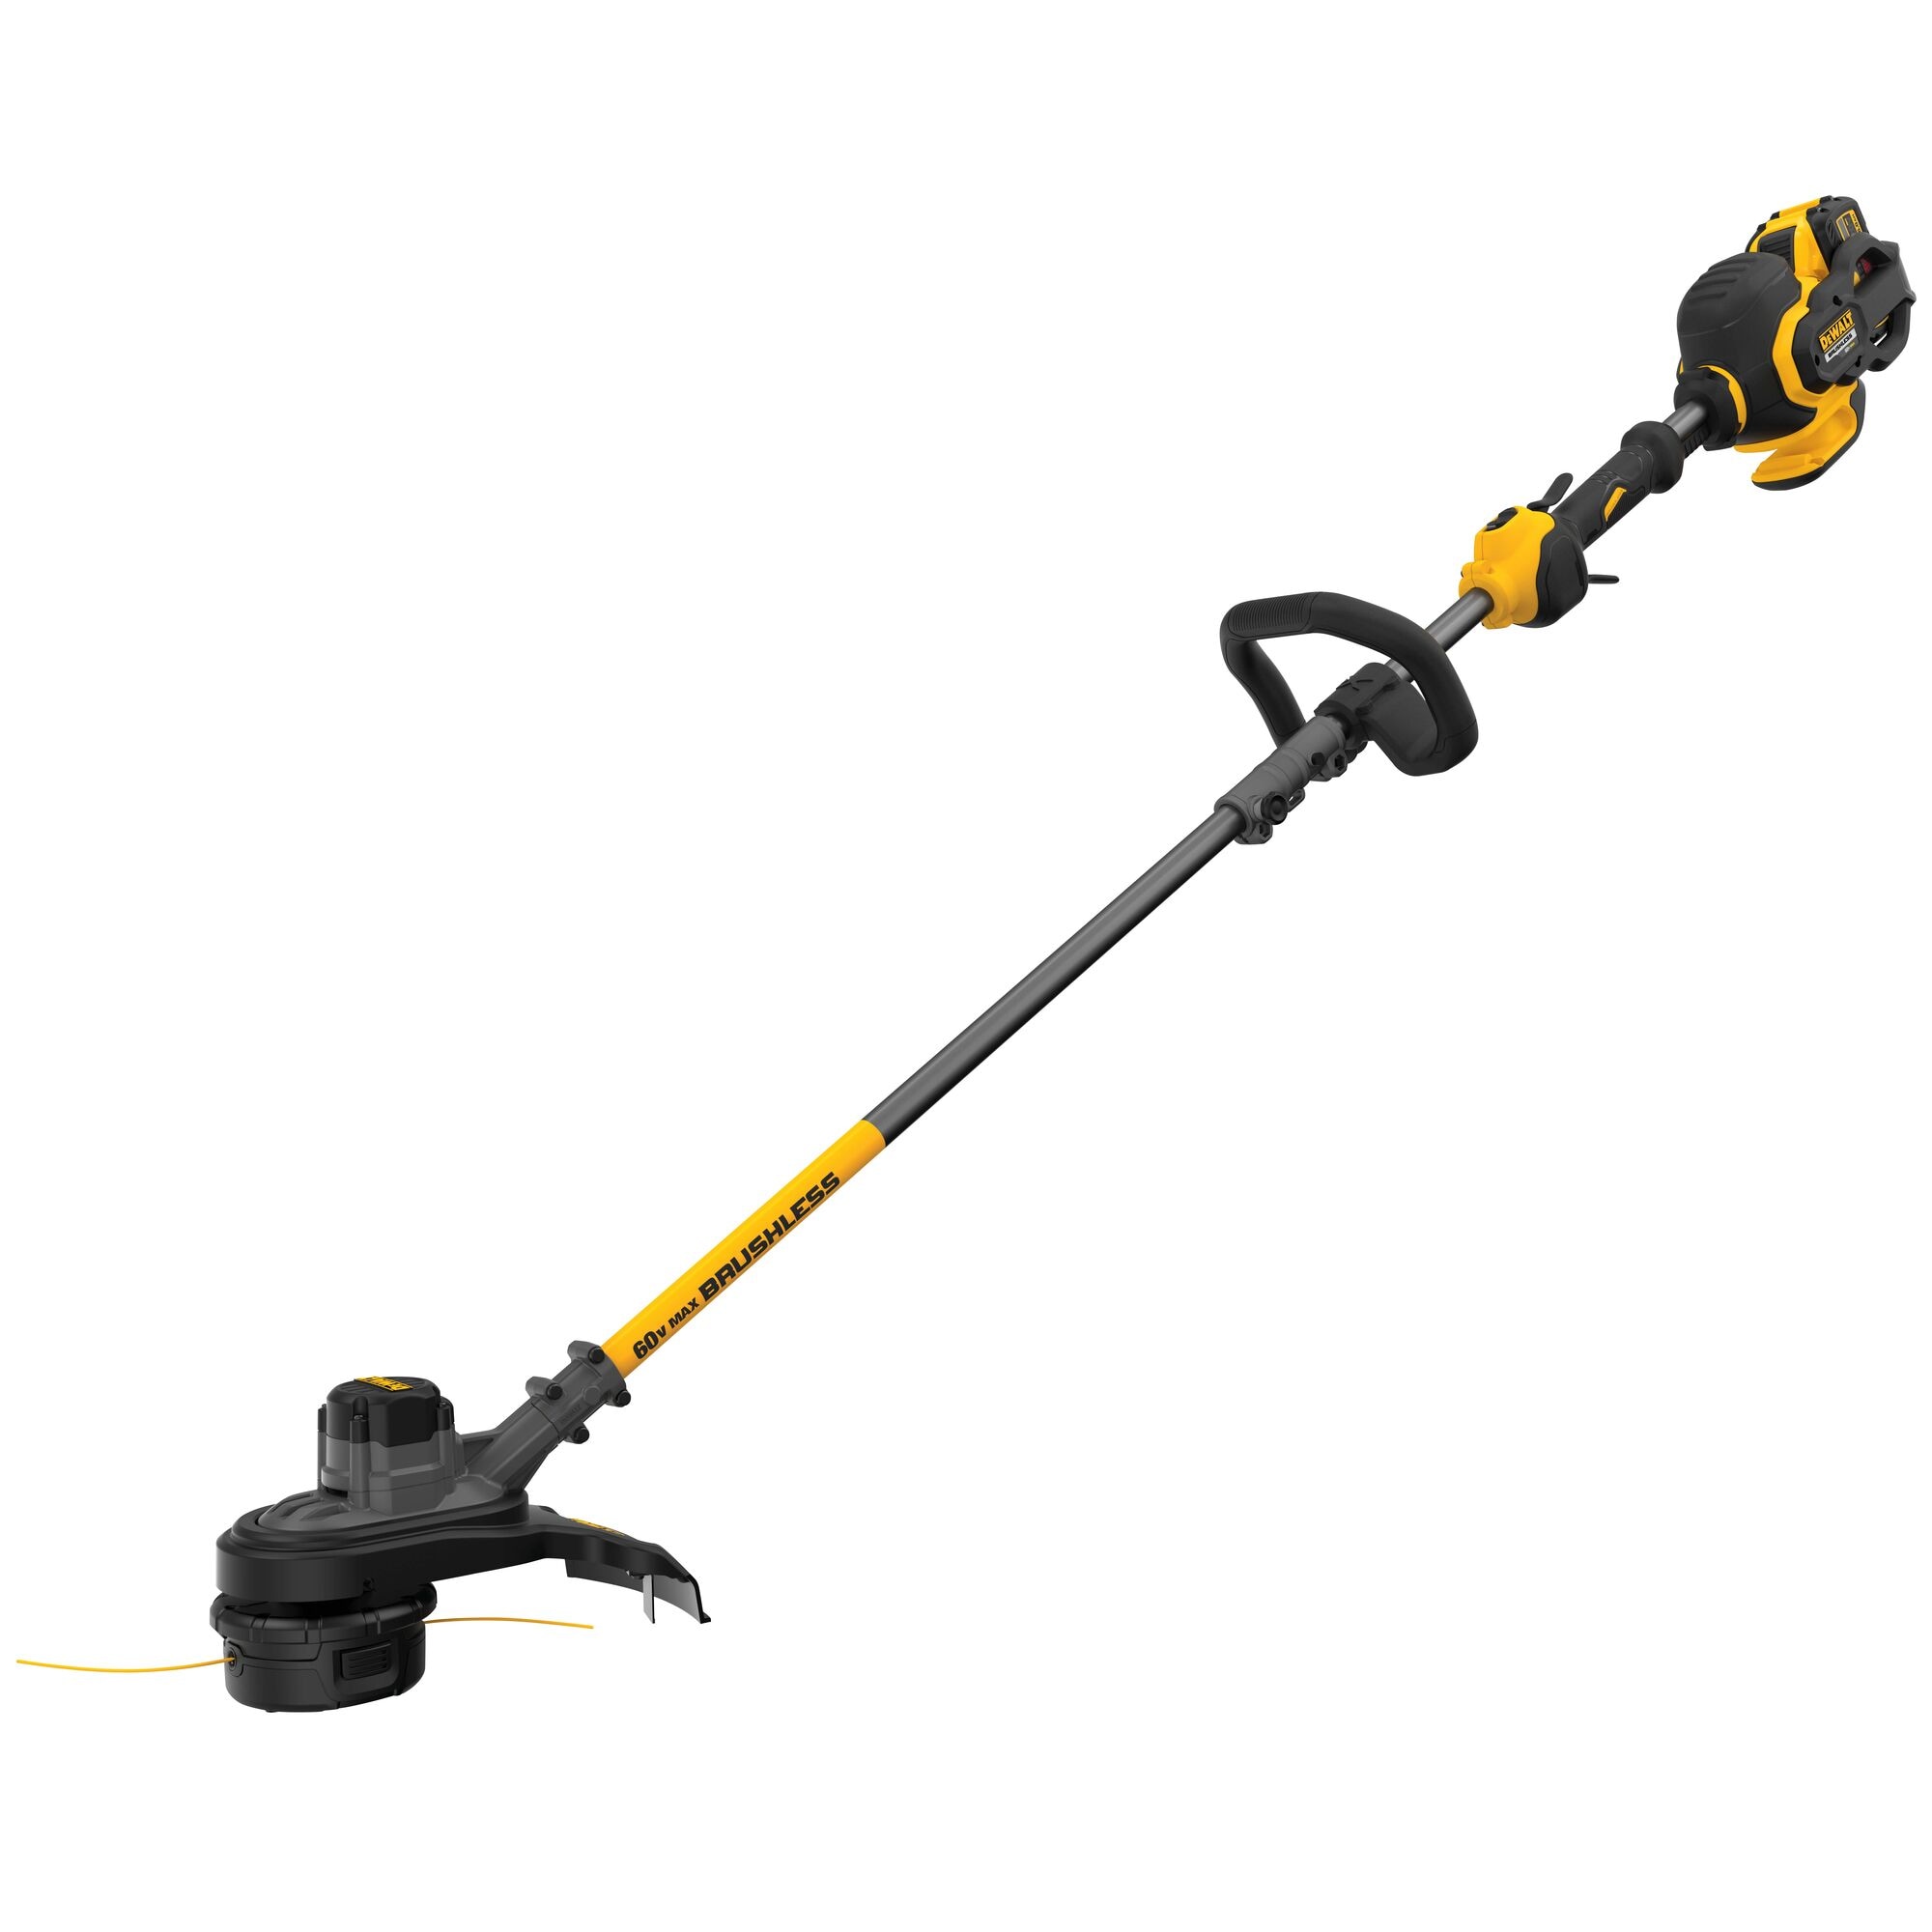 Portable 12V Electric Weed Wacker Grass Trimmer - Battery-Powered